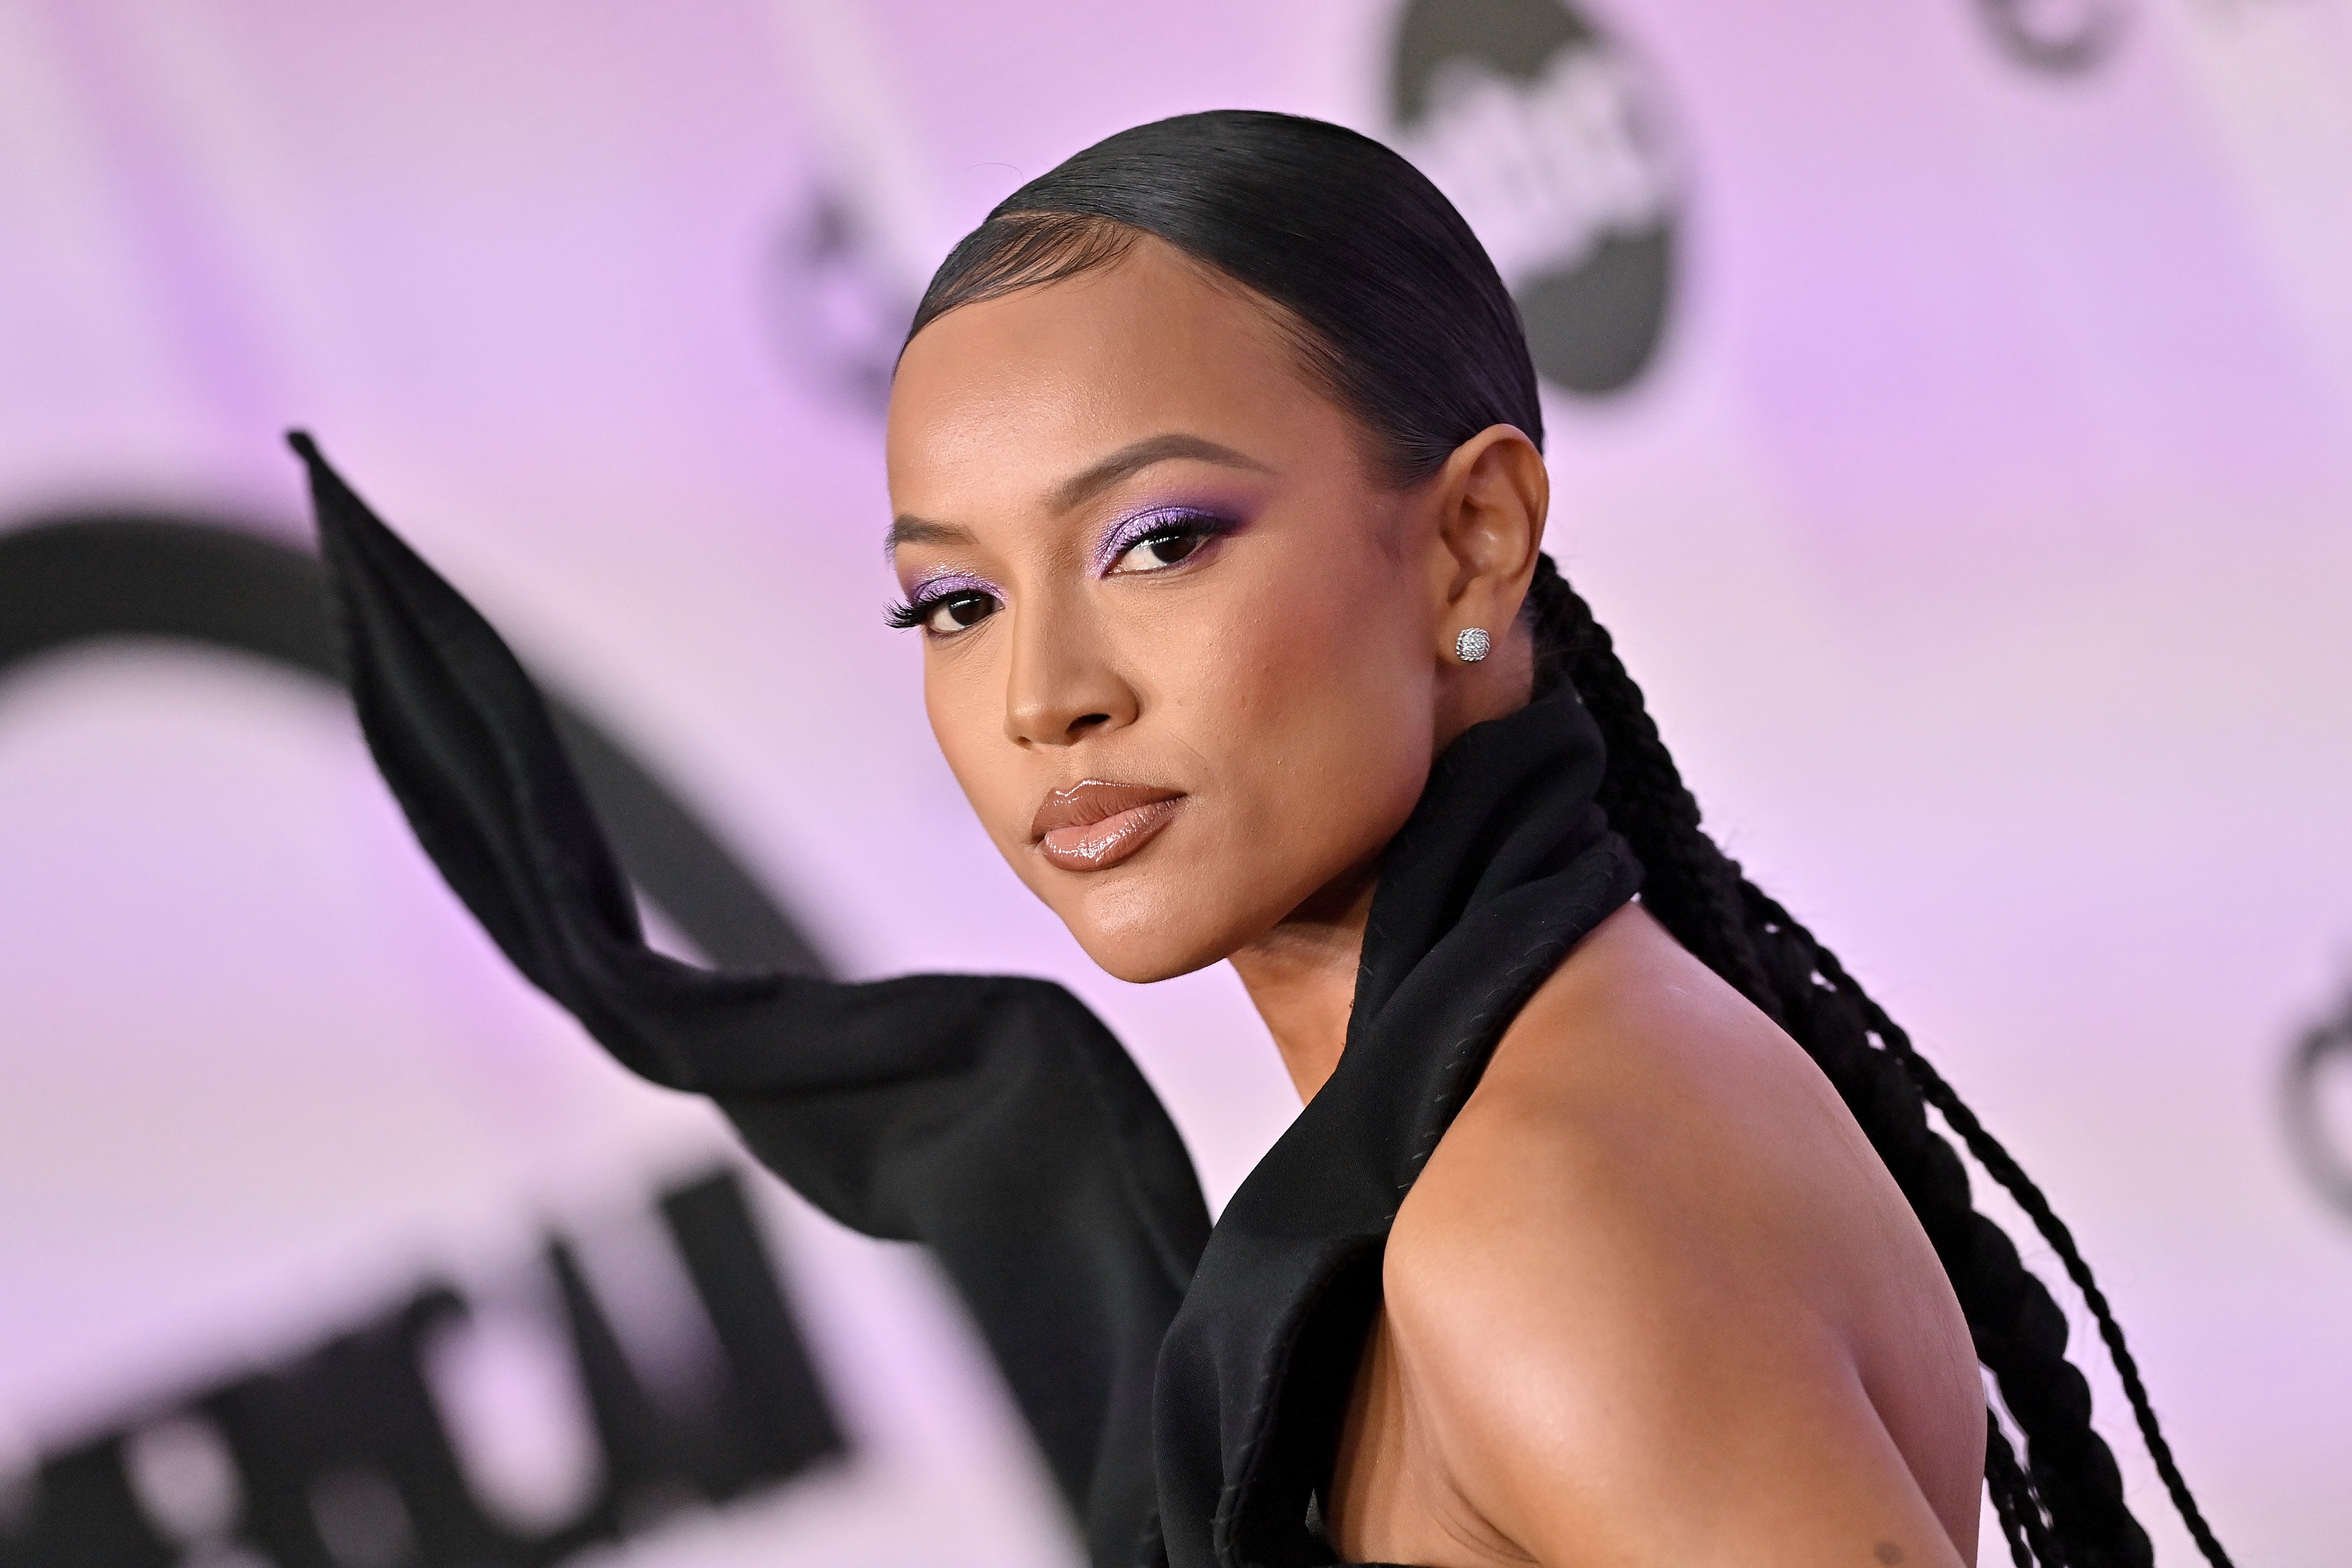 Karrueche Tran at the 2022 American Music Awards in November 2022, in Los Angeles, California.  | Source: Getty Images